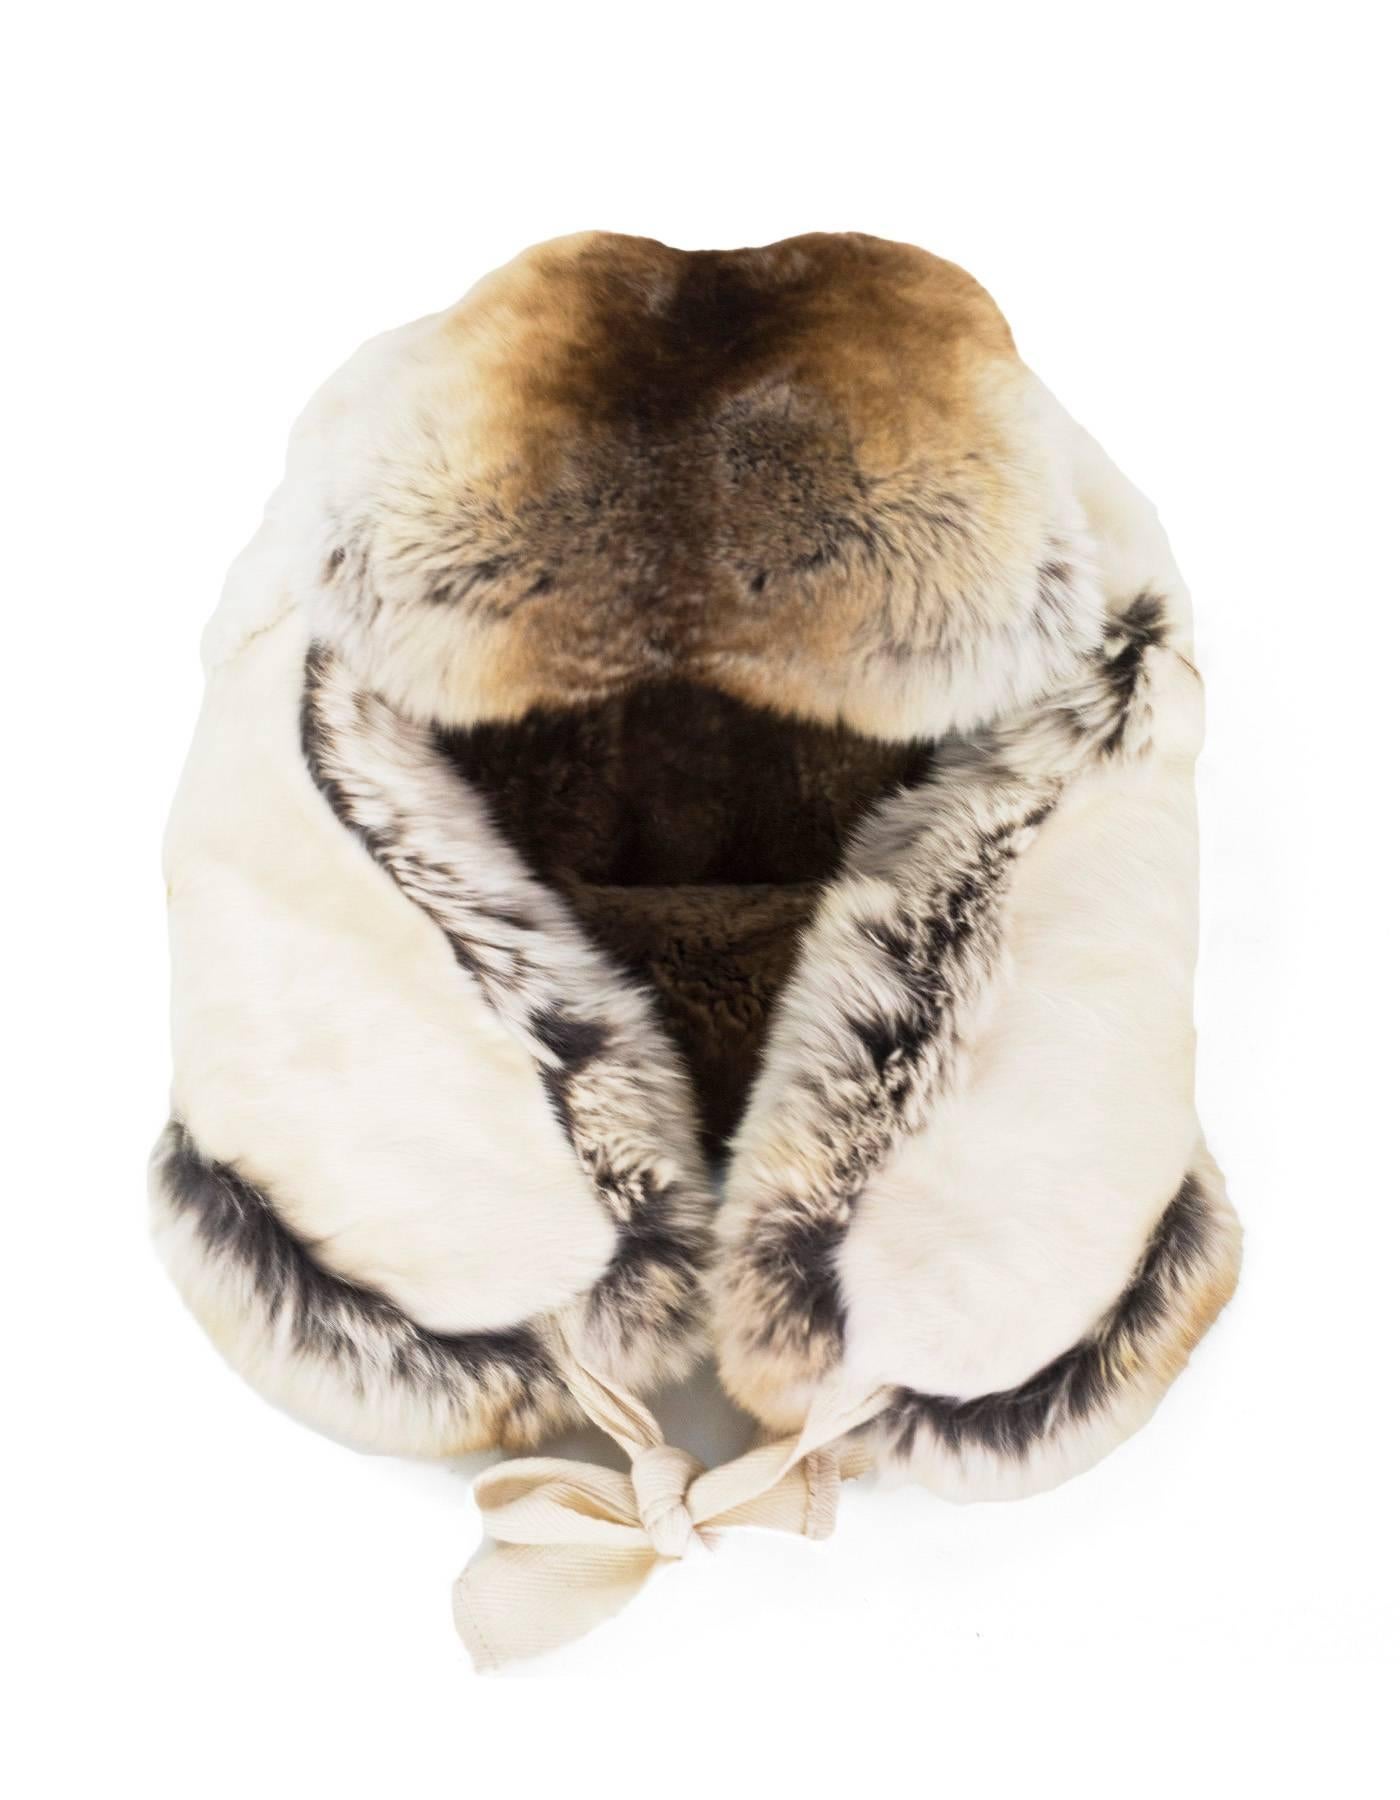 Lanvin Chinchilla & Lamb Fur Trapper Hat Sz 58
Features wool & cashmere interior lining

Made In: Italy
Color: Brown, ivory
Materials: Chinchilla, lamb / Lining: 95% wool, 5% cashmere
Overall Condition: Excellent pre-owned condition wth the